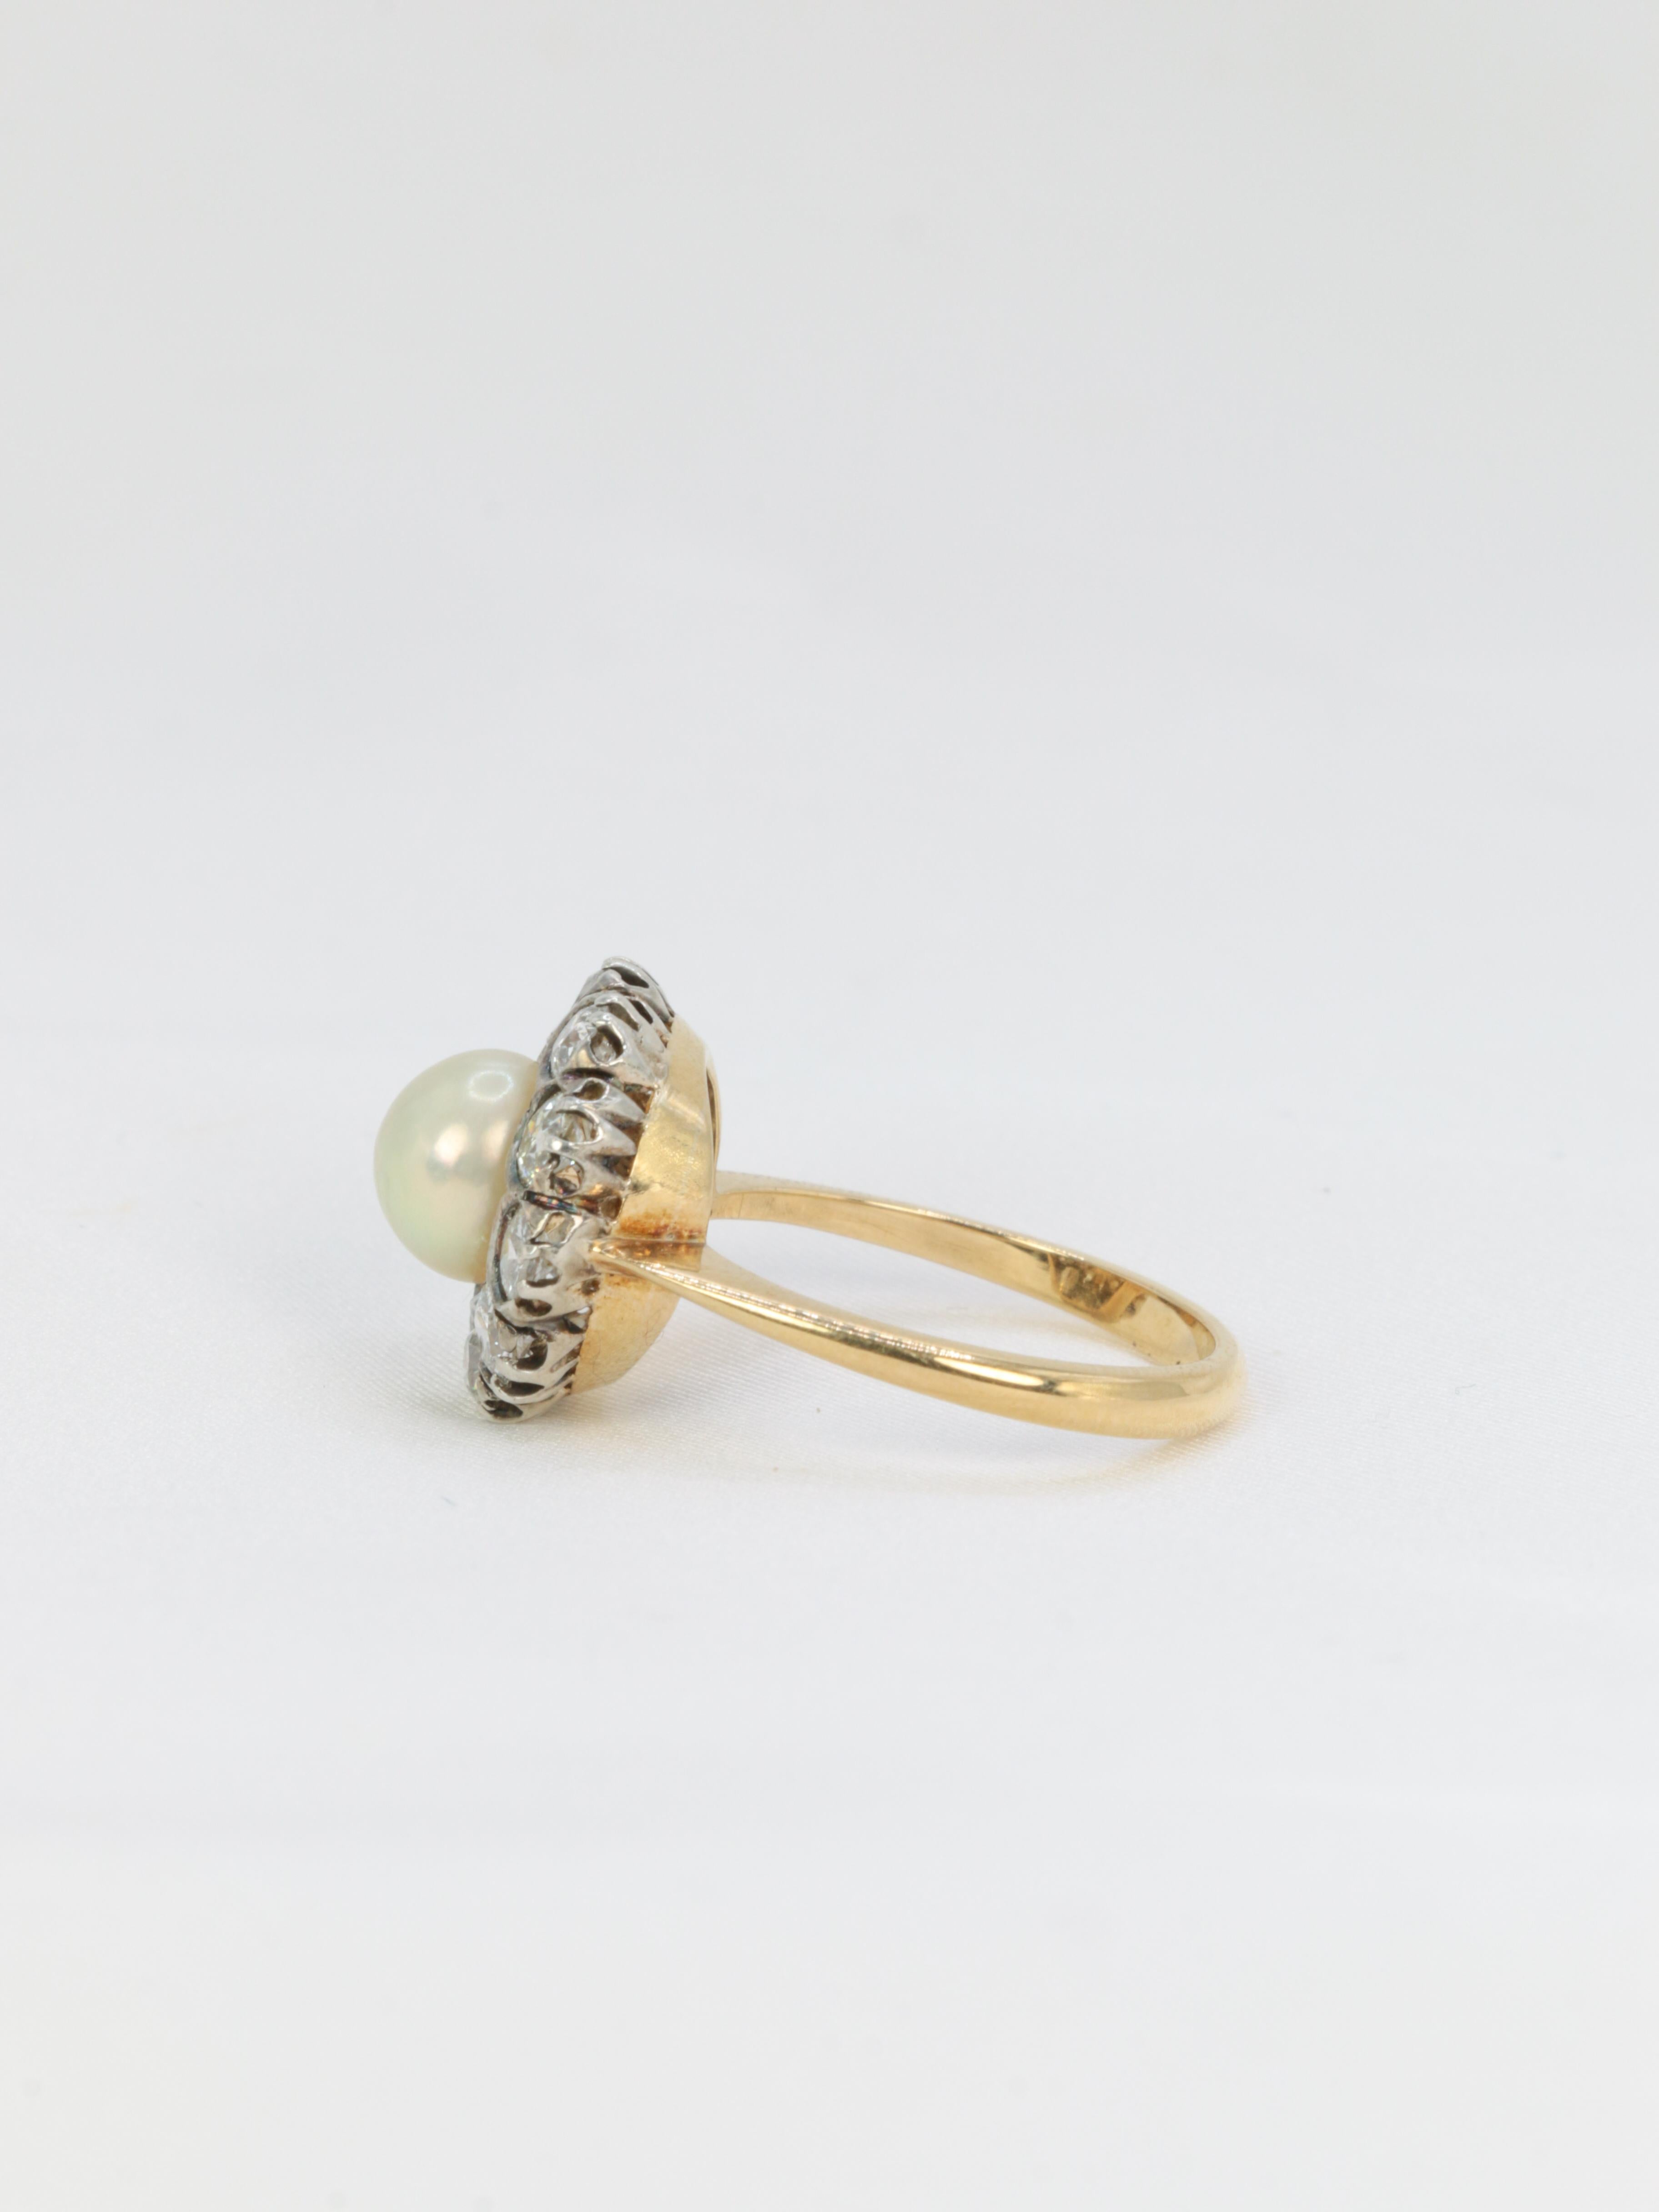 Edwardian Gold and Silver Cluster Ring with Old Mine Cut Diamonds and a Natural For Sale 2